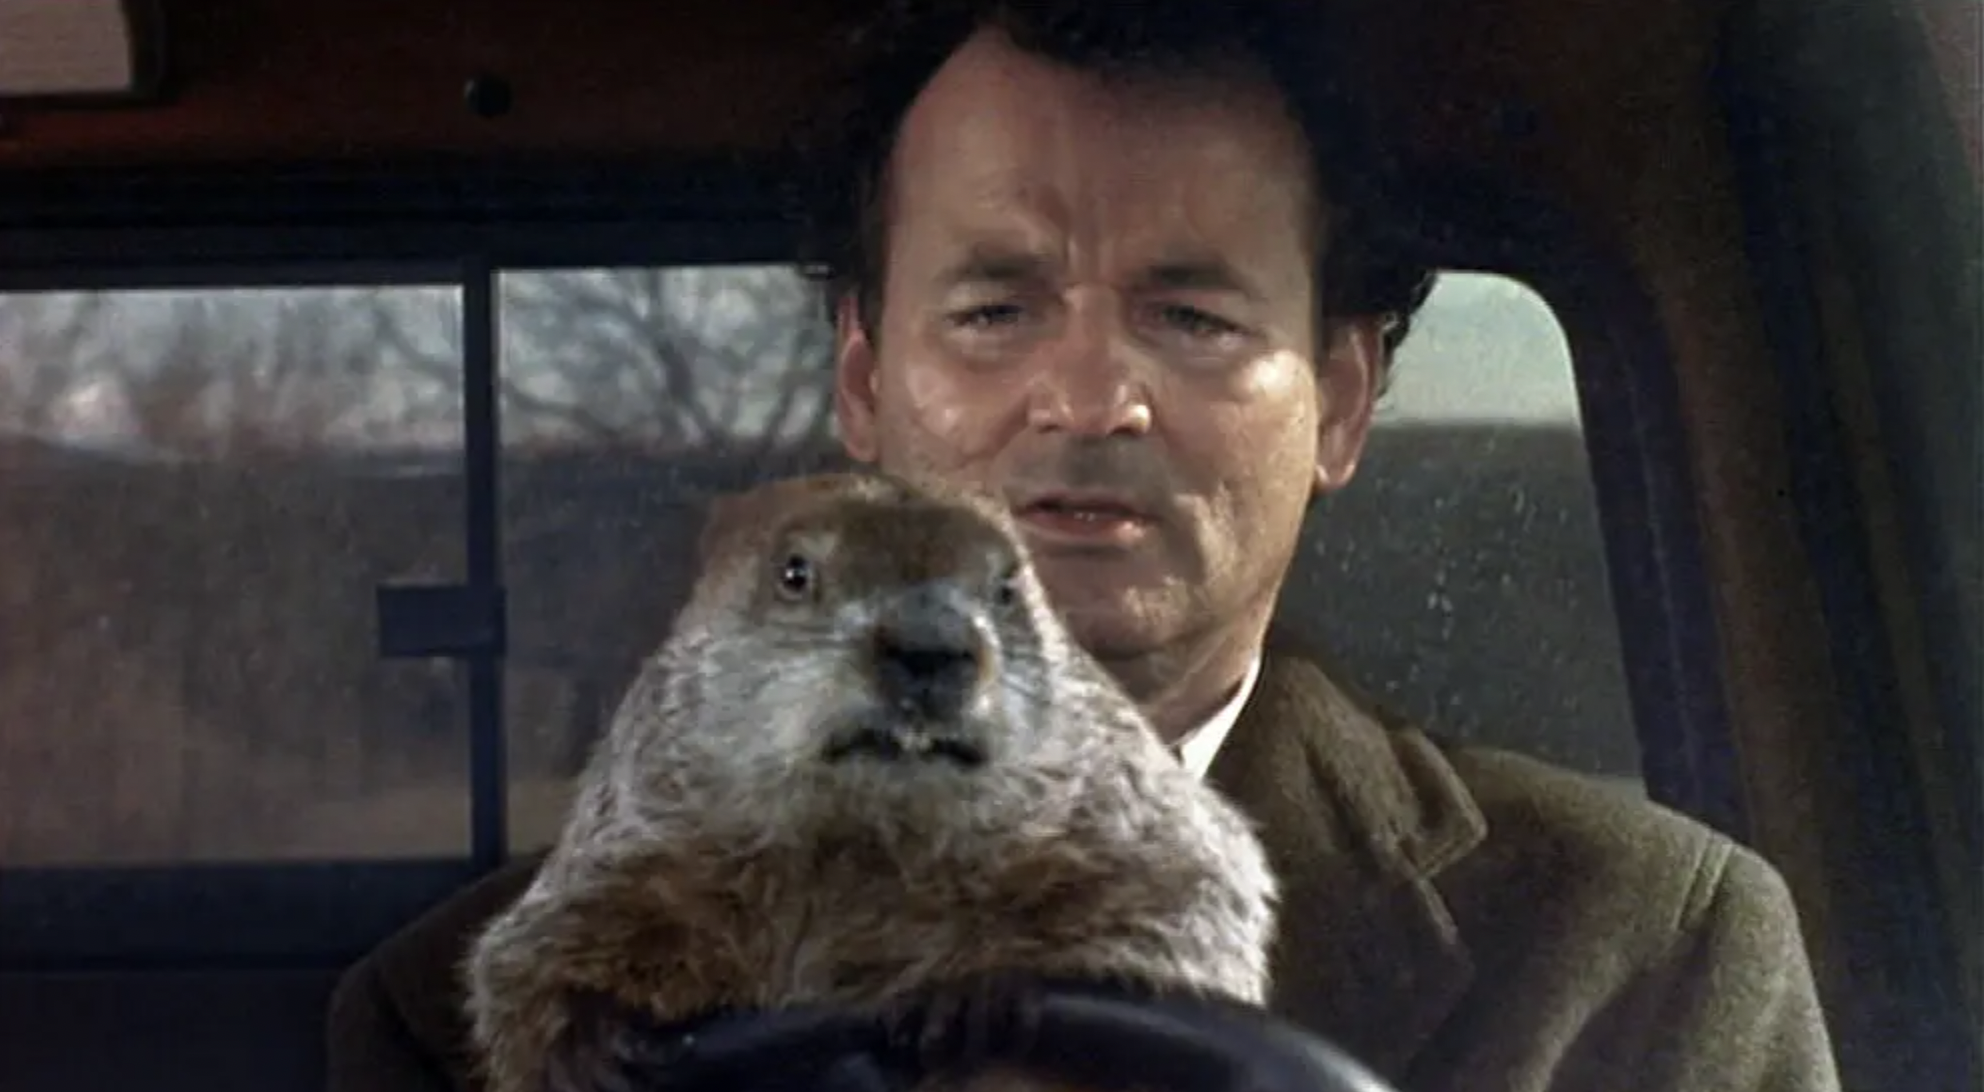 A scene from the movie Groundhog Day with Bill Murray.